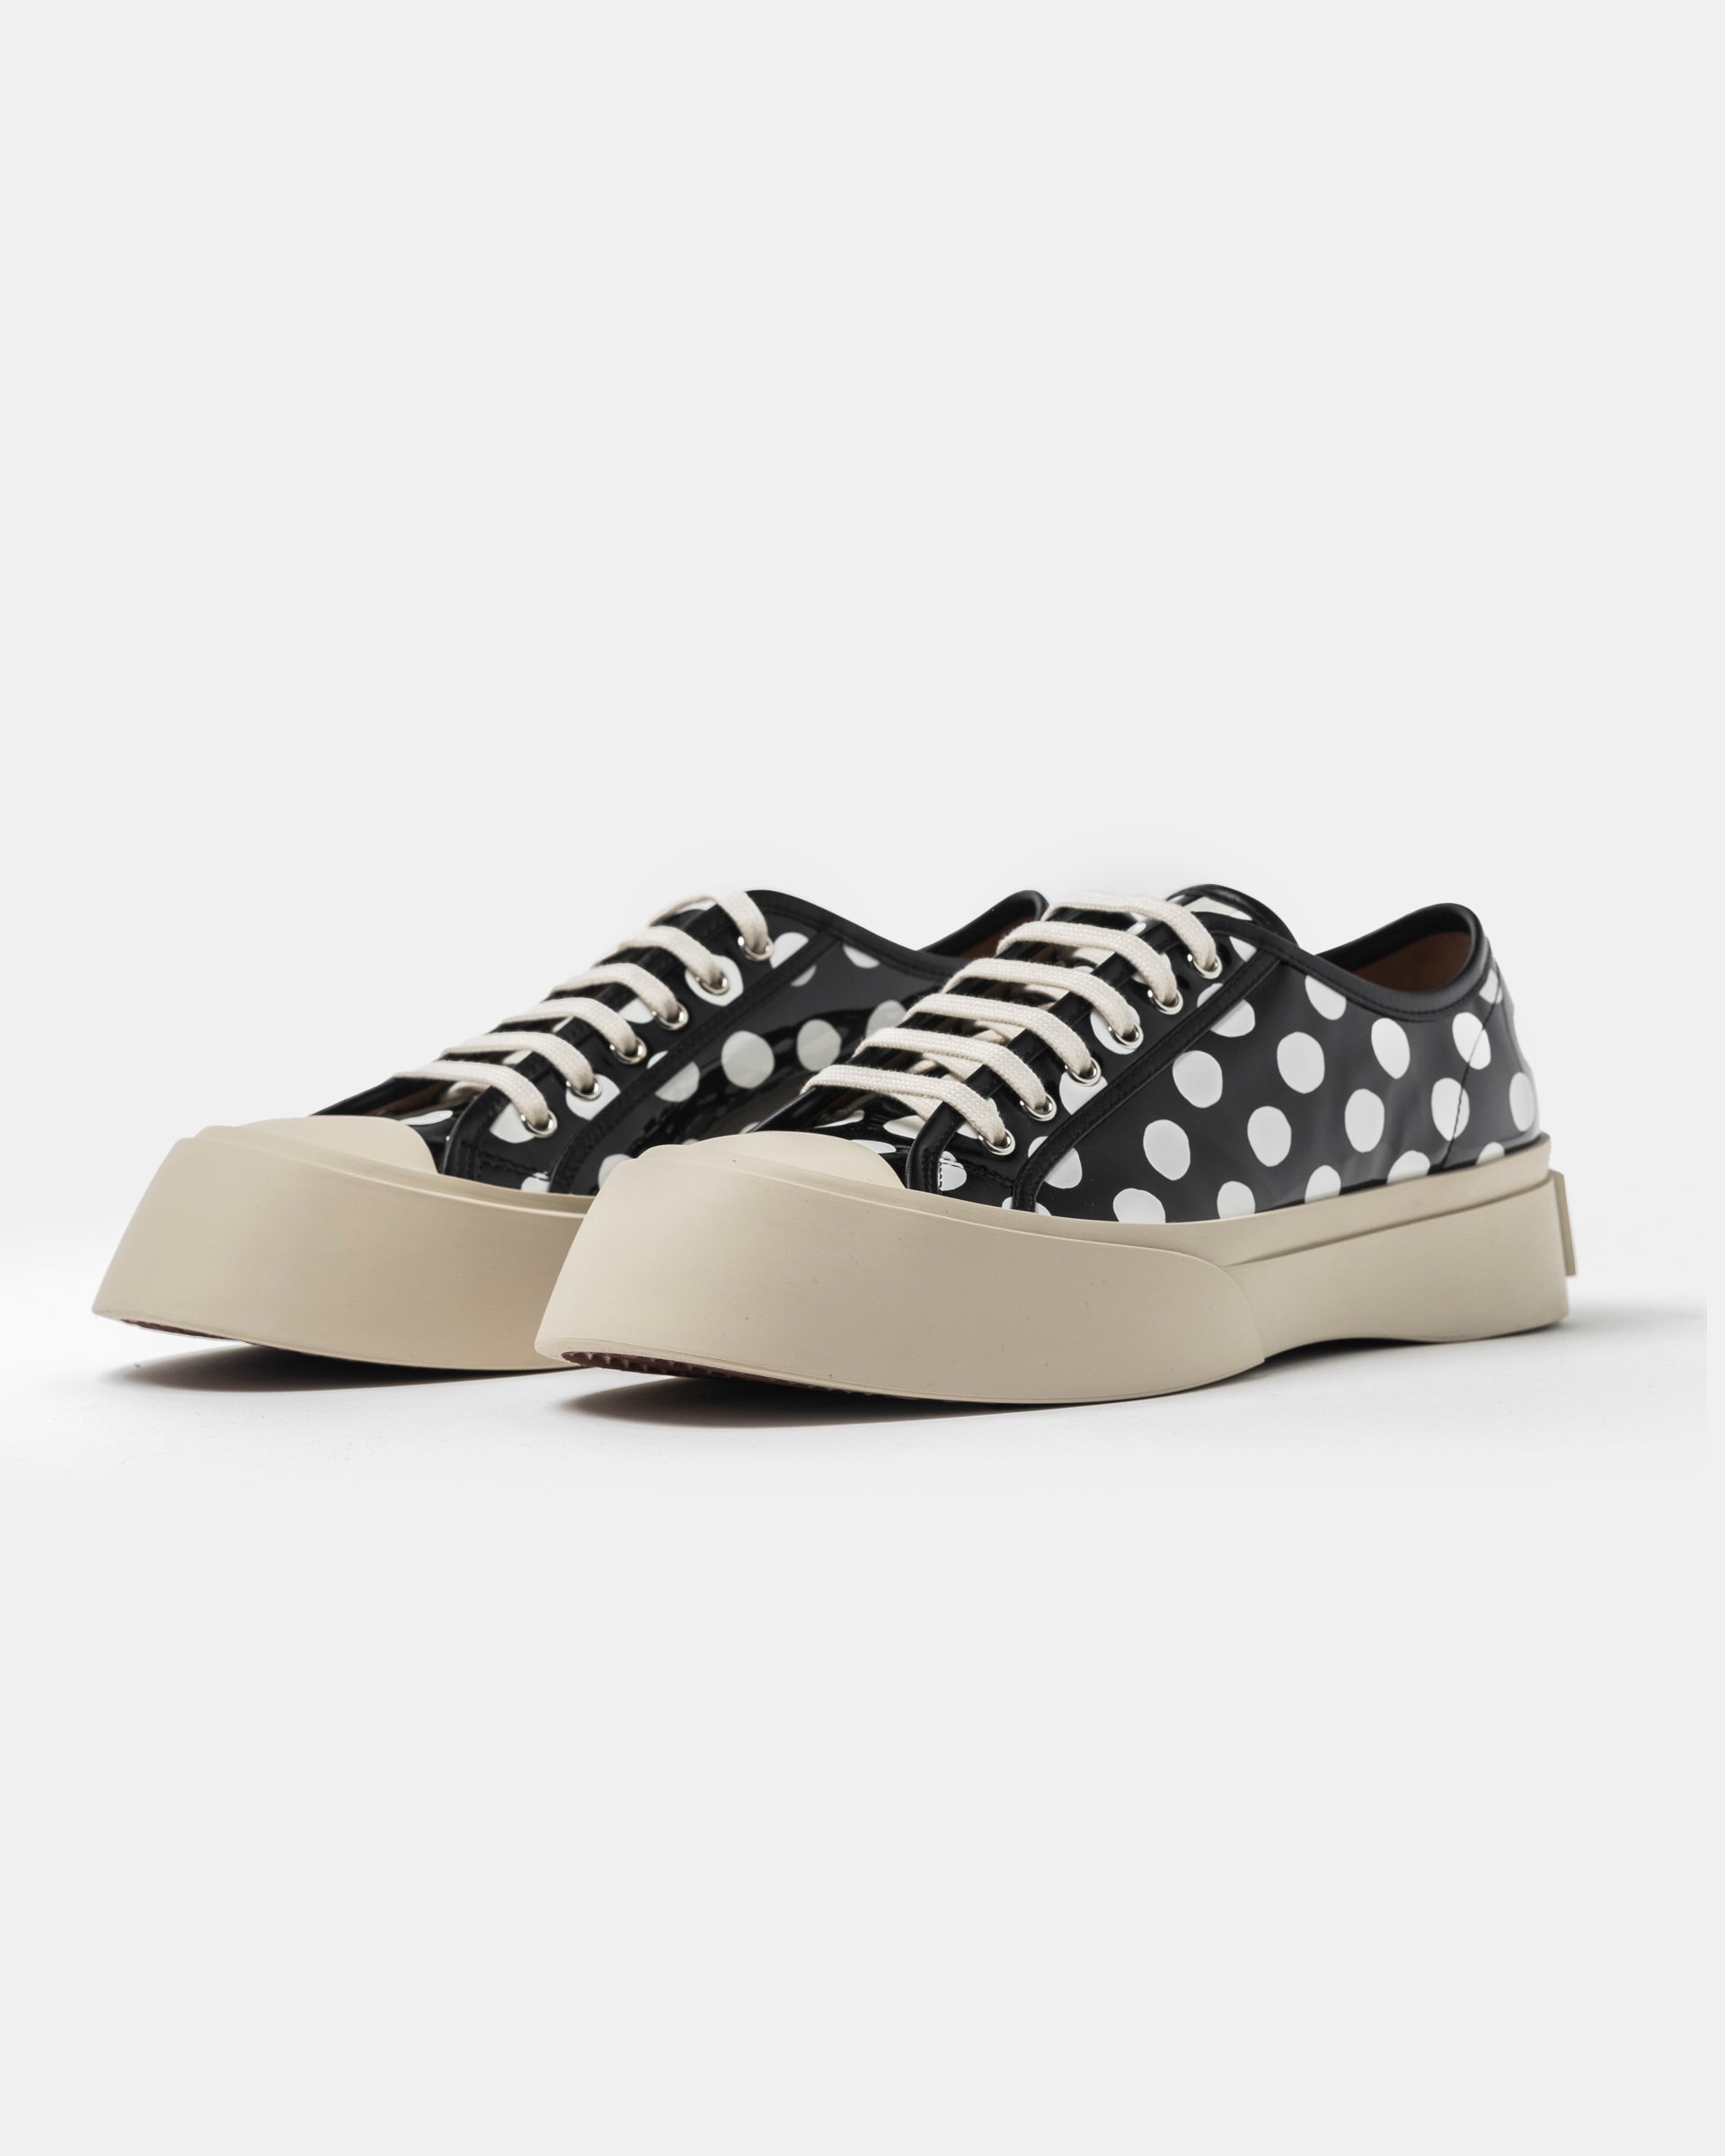 Pablo Lace-Up in Black and White Spot